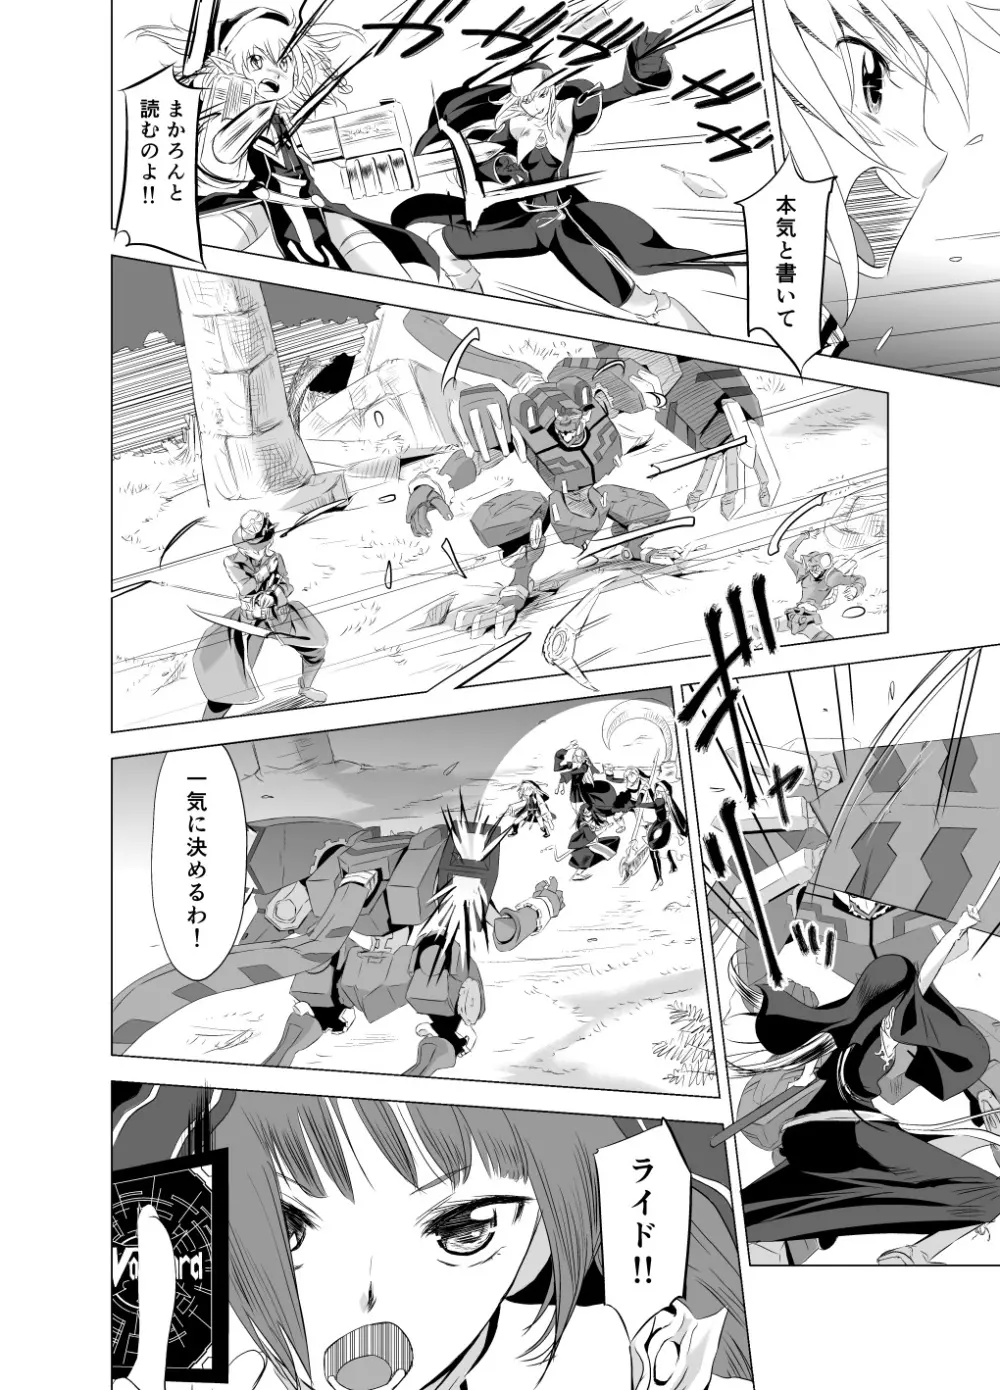 2nd RIDE -Battle Sister crisiS- Page.4